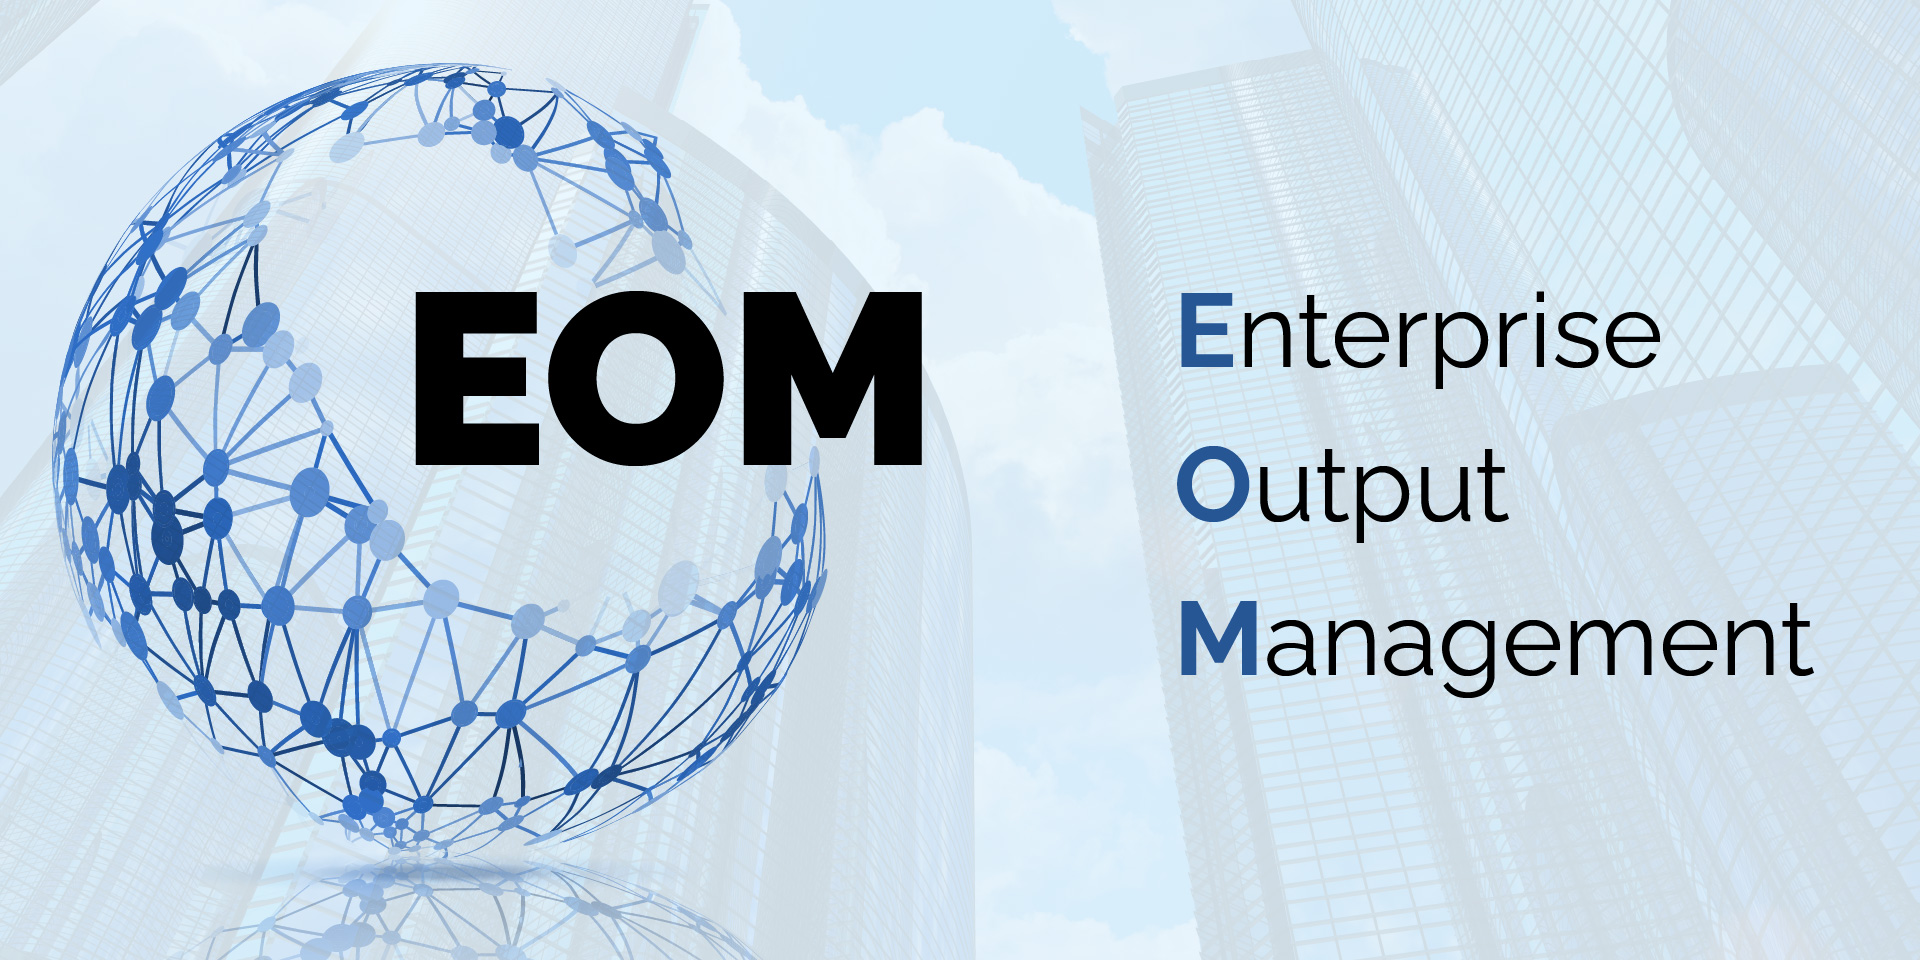 The concept of Enterprise Output Management (EOM) refers to the digital process through which companies manage, format, and distribute data created from operational applications.